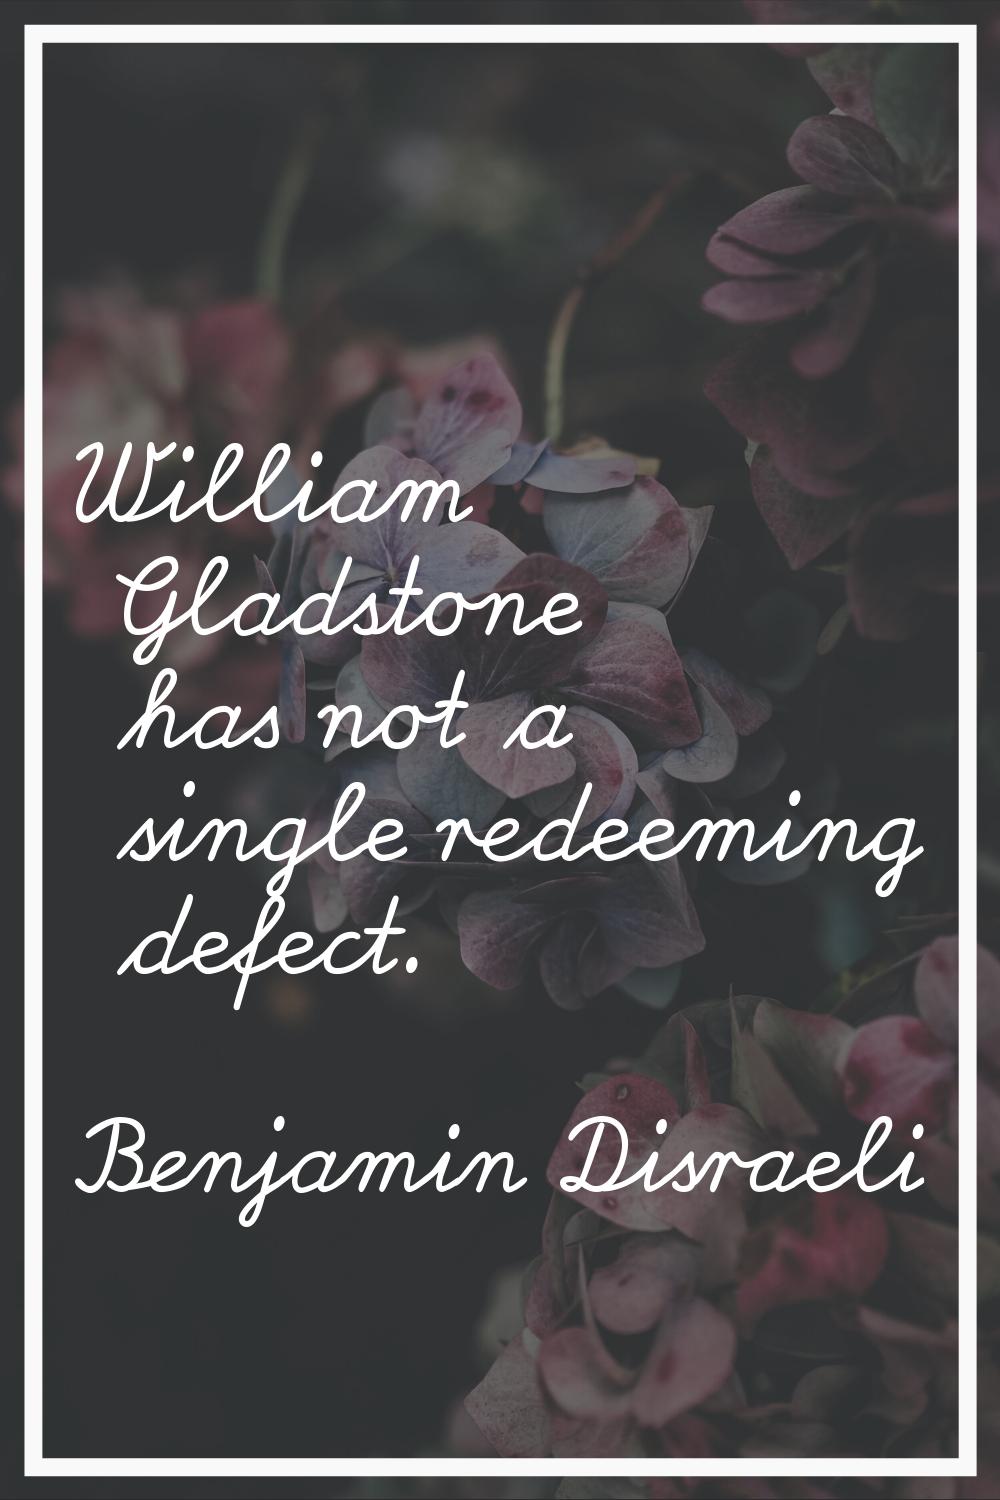 William Gladstone has not a single redeeming defect.